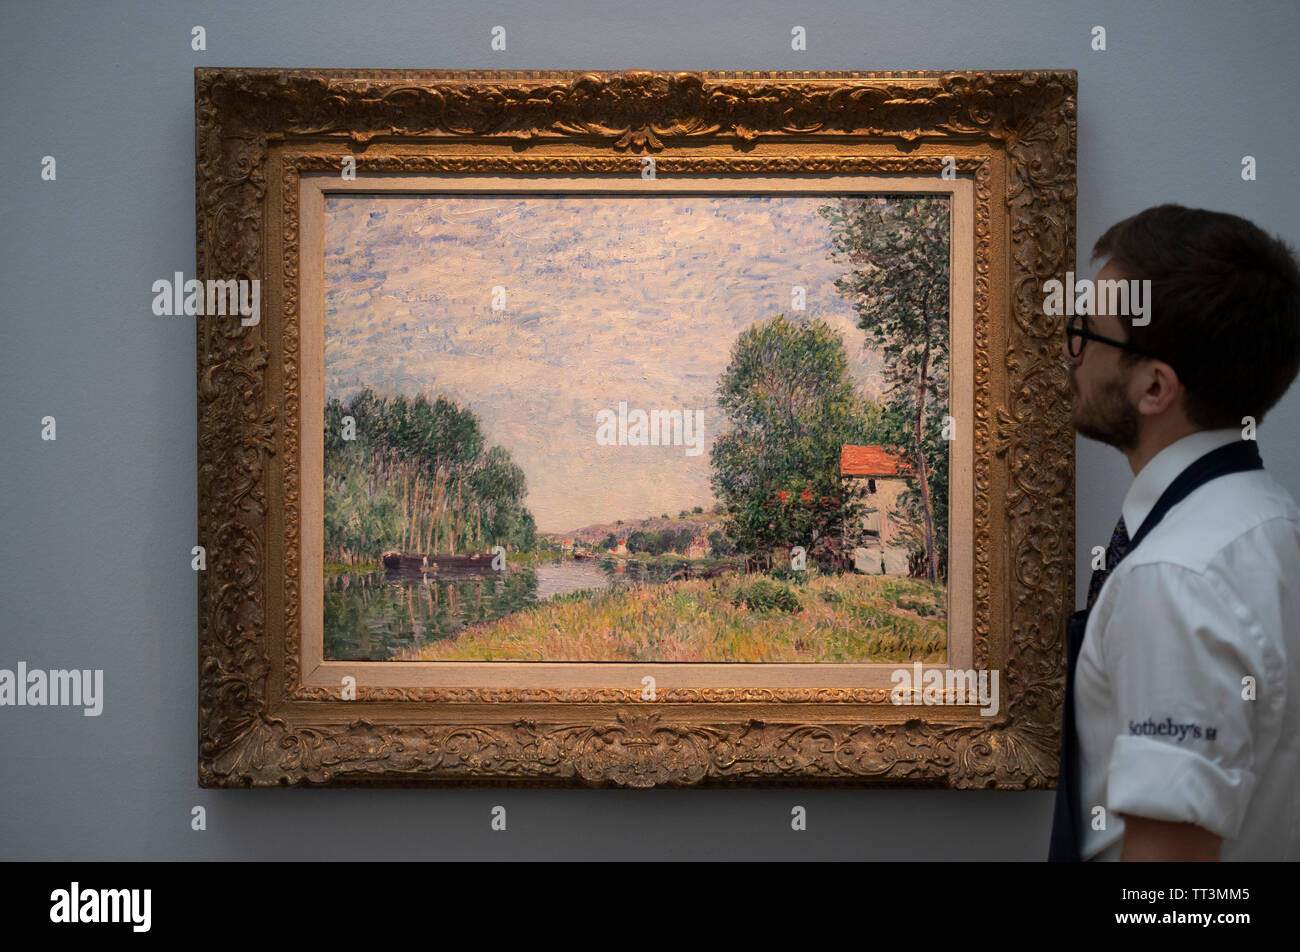 Sotheby’s, London, UK. 14th June 2019. Major Impressionism to Modern British works, some unseen for decades, are previewed for the Sotheby’s summer sale. Image: Alfred Sisley. Les Bords du Loing a Moret, estimate £1m-1.5m. Credit: Malcolm Park/Alamy Live News. Stock Photo